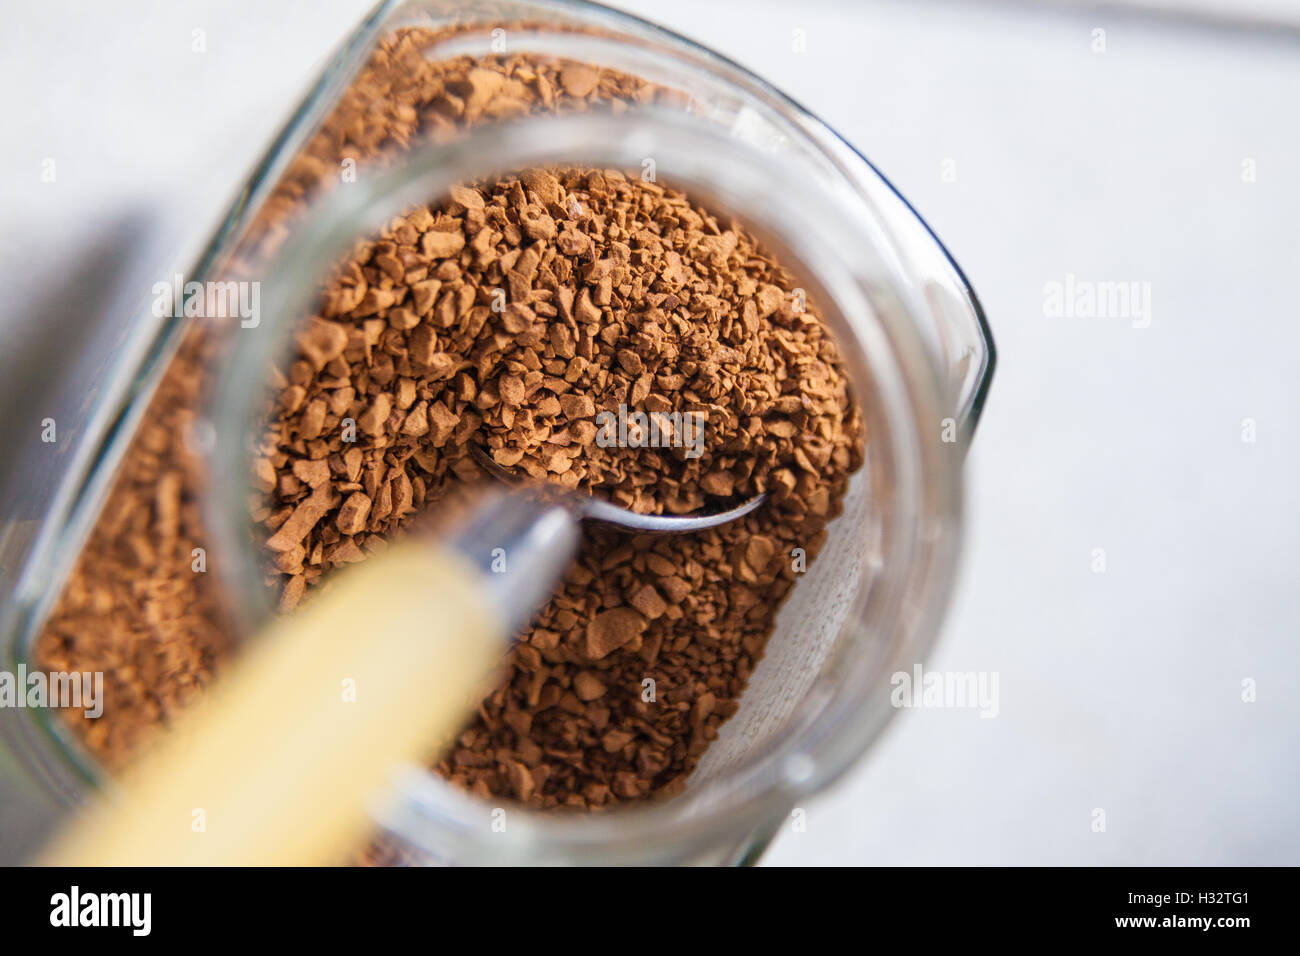 A spoon in a jar of instant coffee granules. Stock Photo